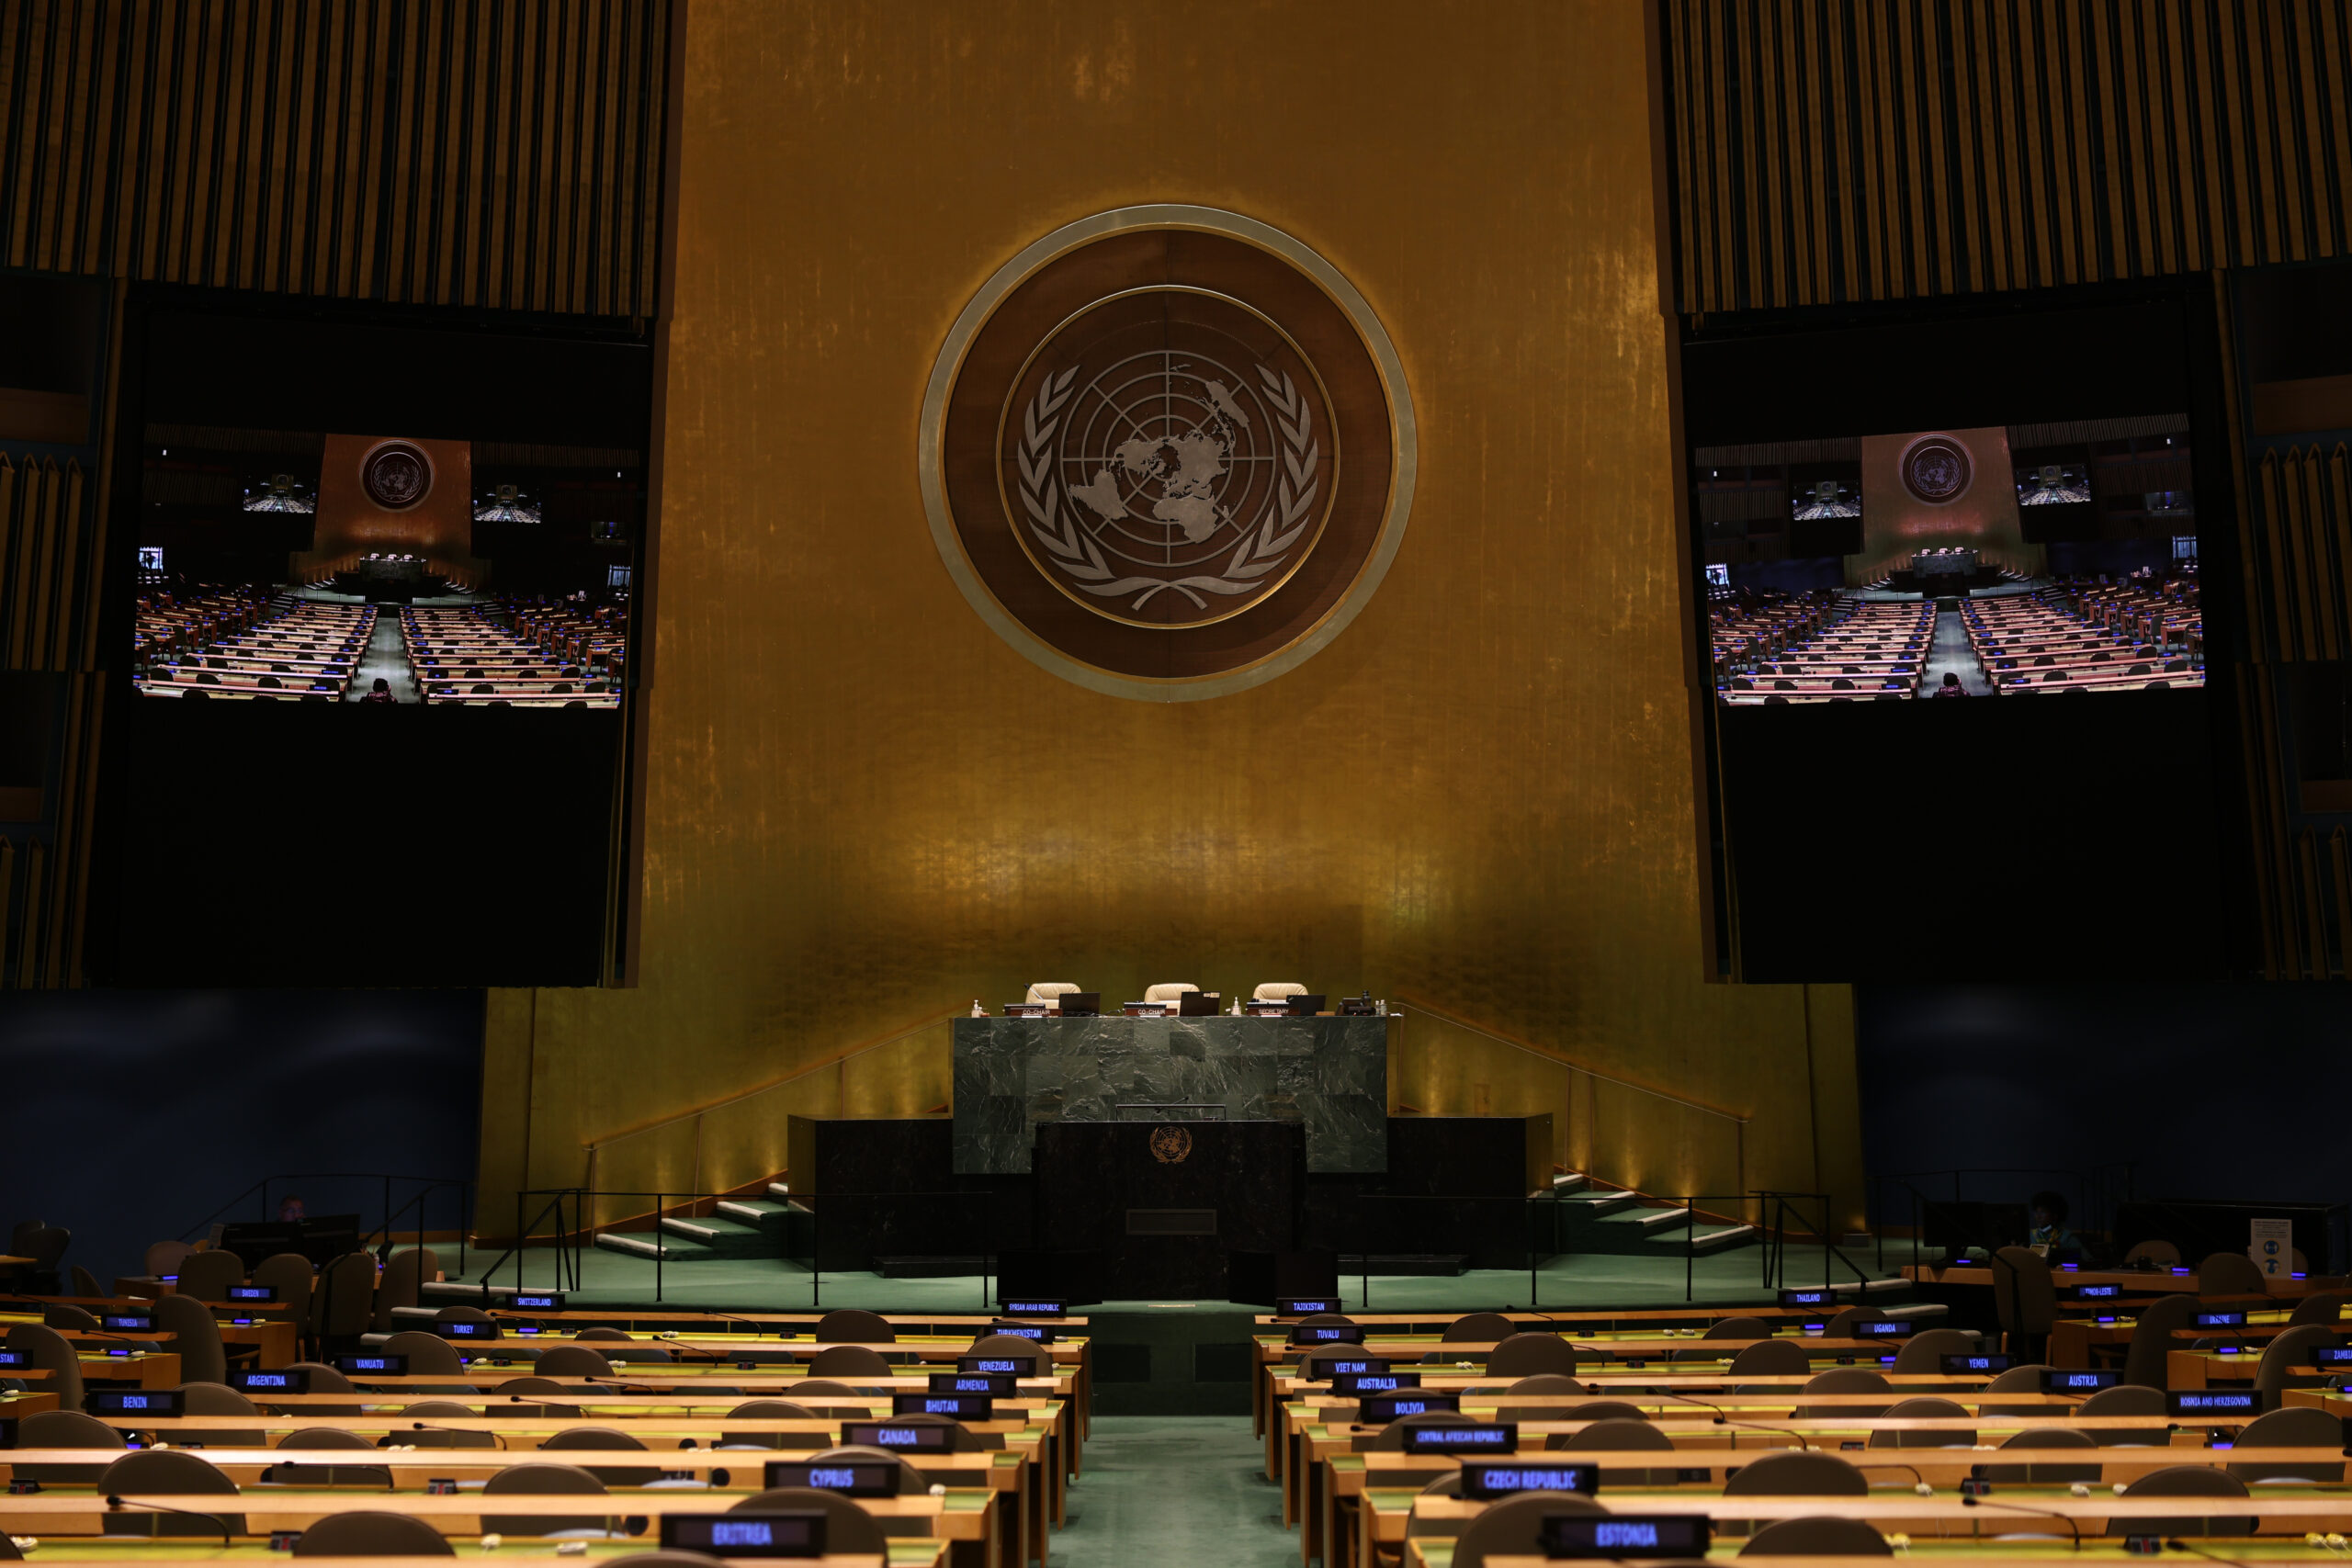 United Nations General Assembly chamber, front view of the podium with a UN emblem